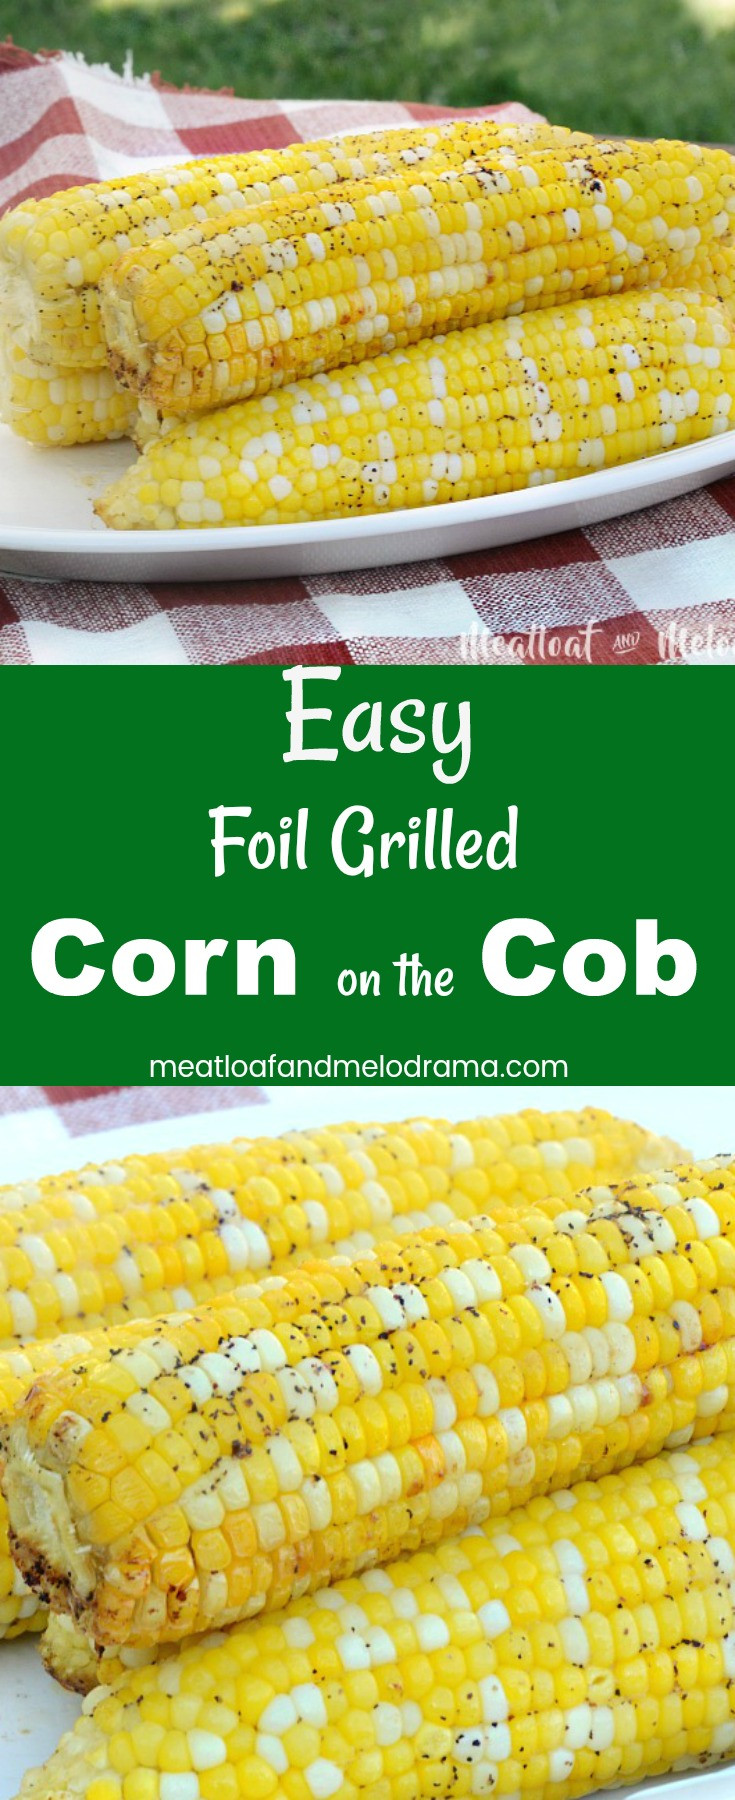 Grilled Corn On the Cob In Foil Luxury Foil Grilled Corn On the Cob Meatloaf and Melodrama